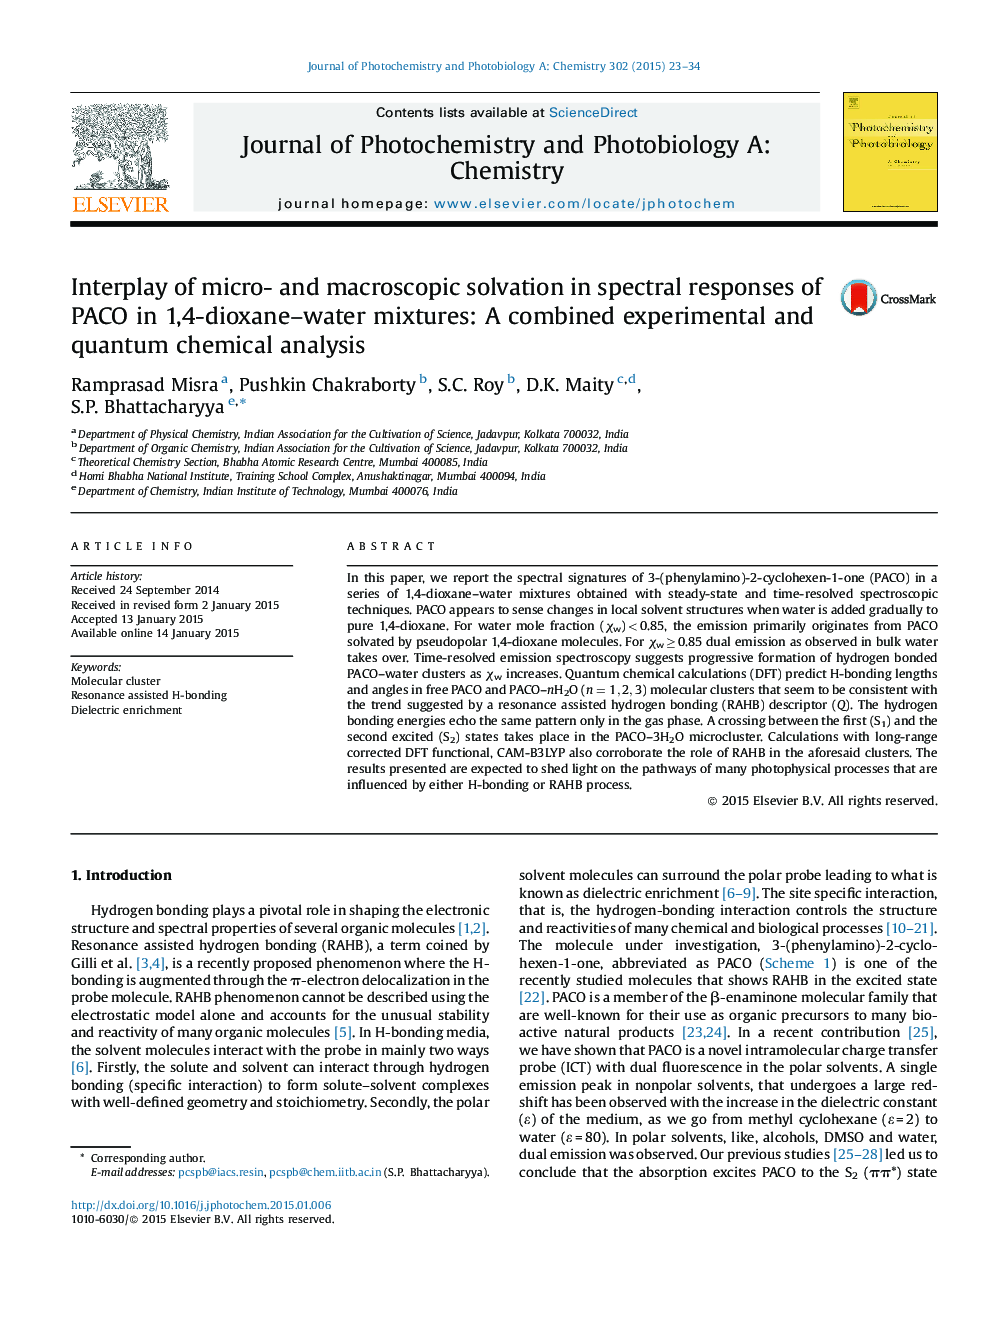 Interplay of micro- and macroscopic solvation in spectral responses of PACO in 1,4-dioxane–water mixtures: A combined experimental and quantum chemical analysis